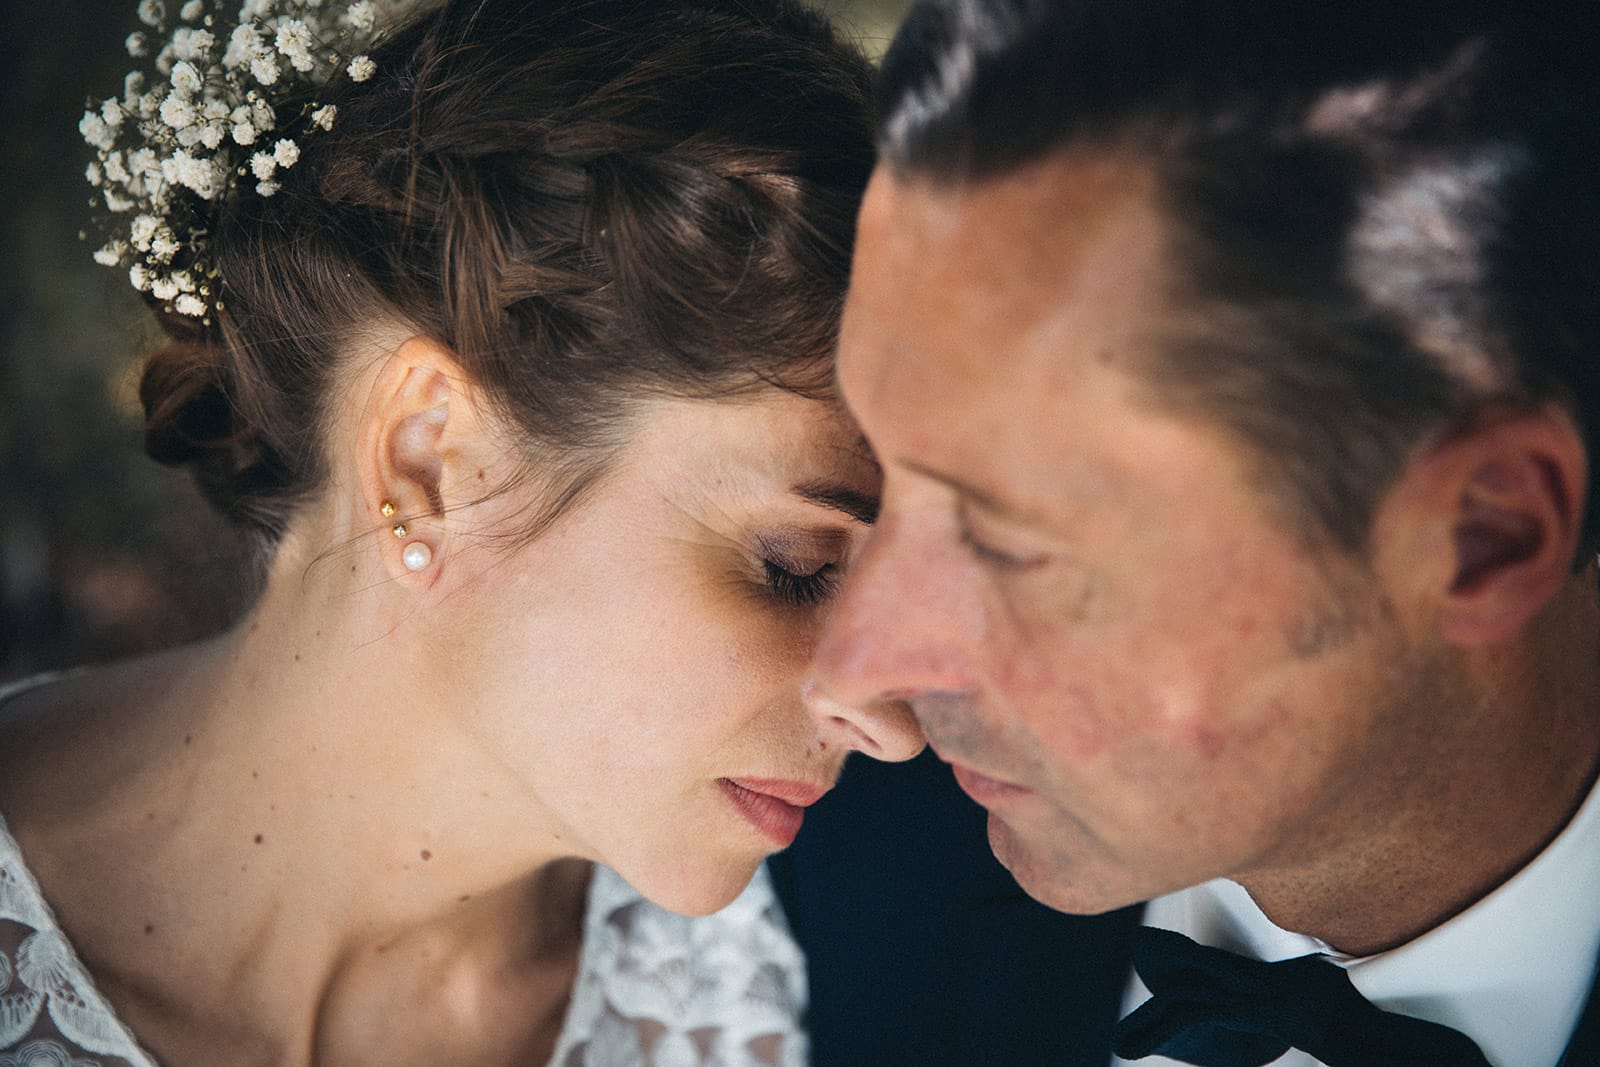  How to choose your wedding photographer 2018 2019 Best Wedding Photographer comment choisir son photographe de mariage 2018 2019 meilleur photographe de mariageLyon Photographe mariage Lyon Photographe reportage mariage Lyon